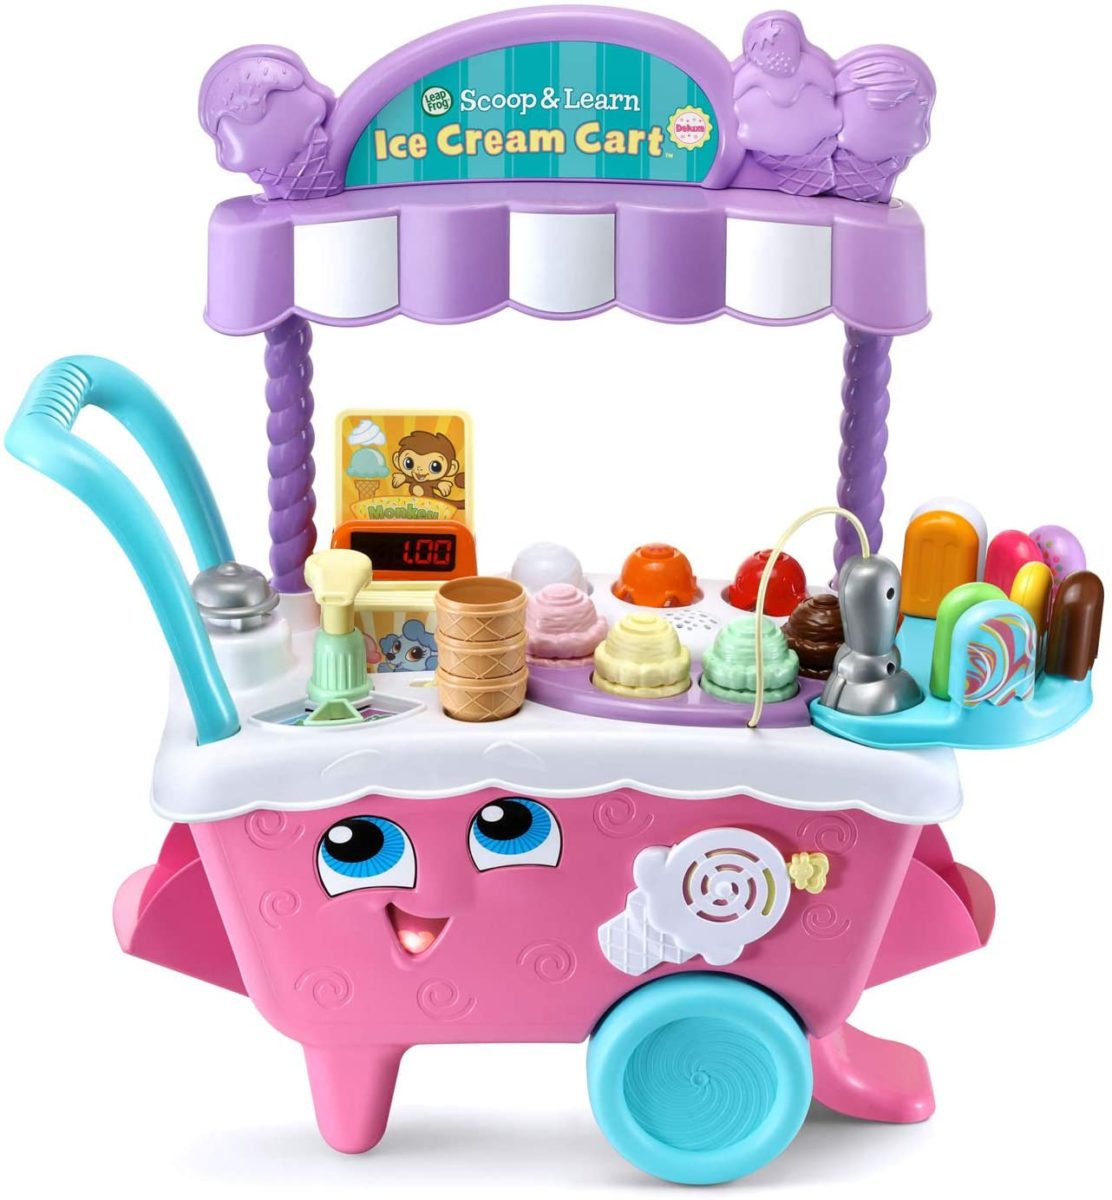 14 Toys for Kids From Amazon that Have a 5-Star Rating and Over 500 Reviews | We gathered 14 toys for all different ages that have received more than 500 product reviews from parents and others just like you.